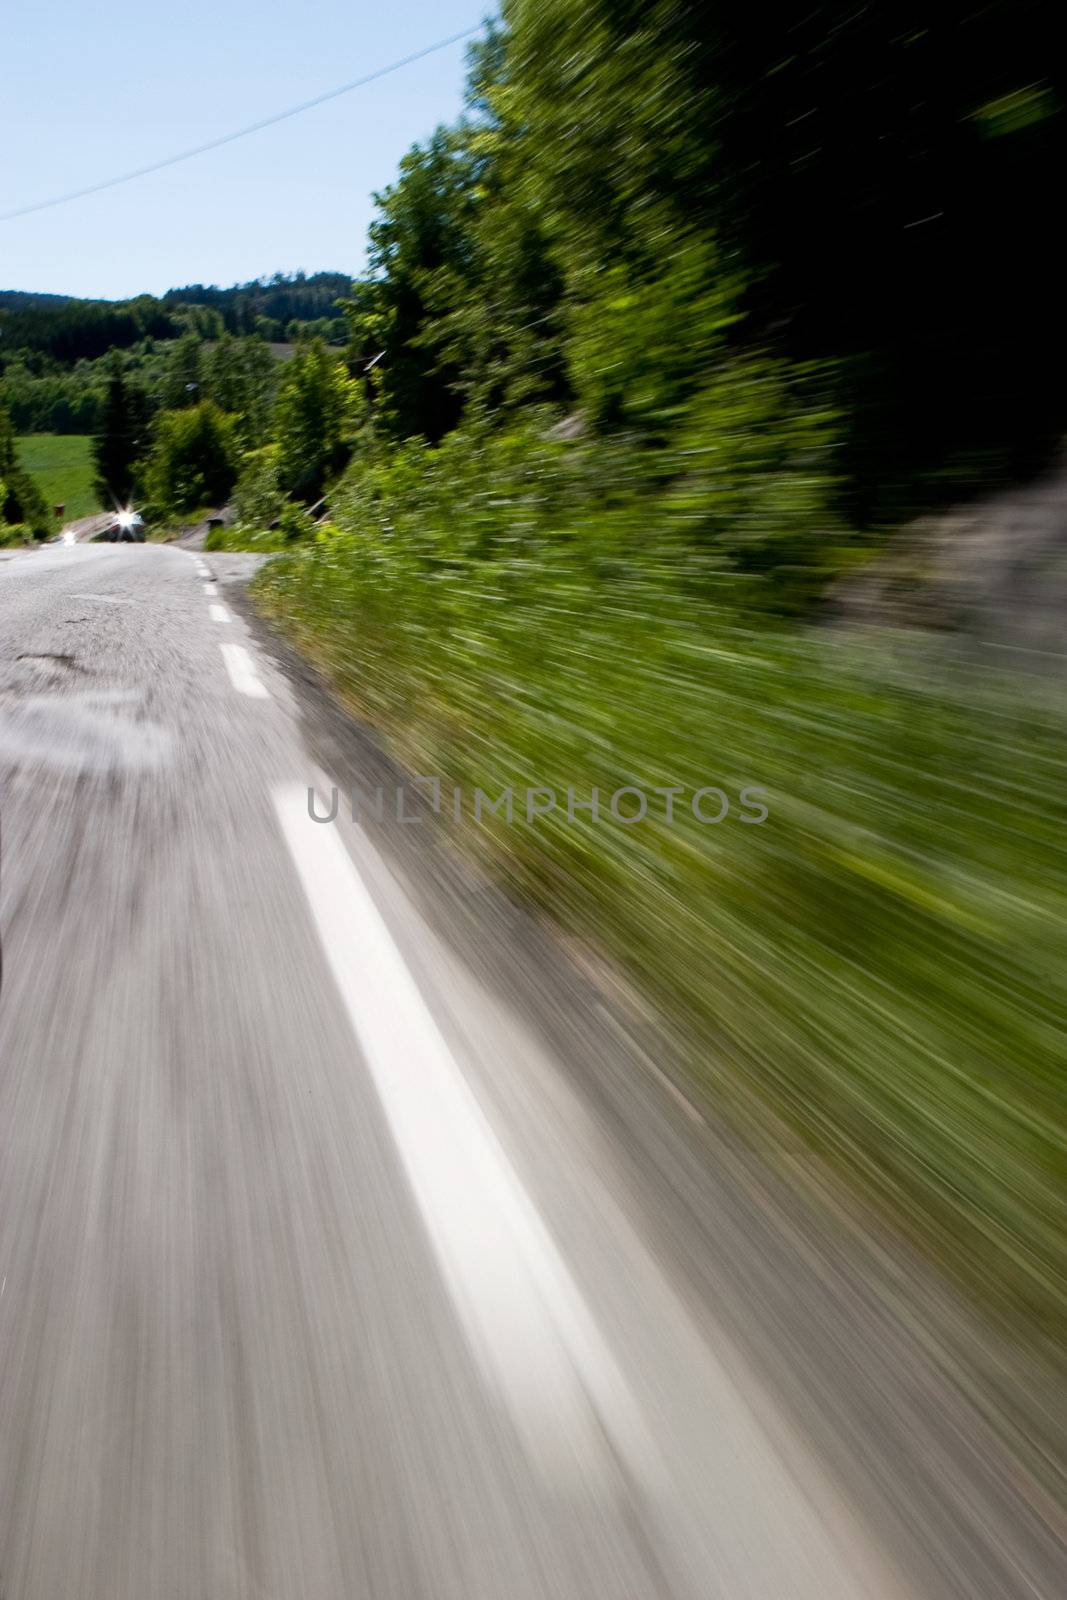 A speed travelling image with motion blur